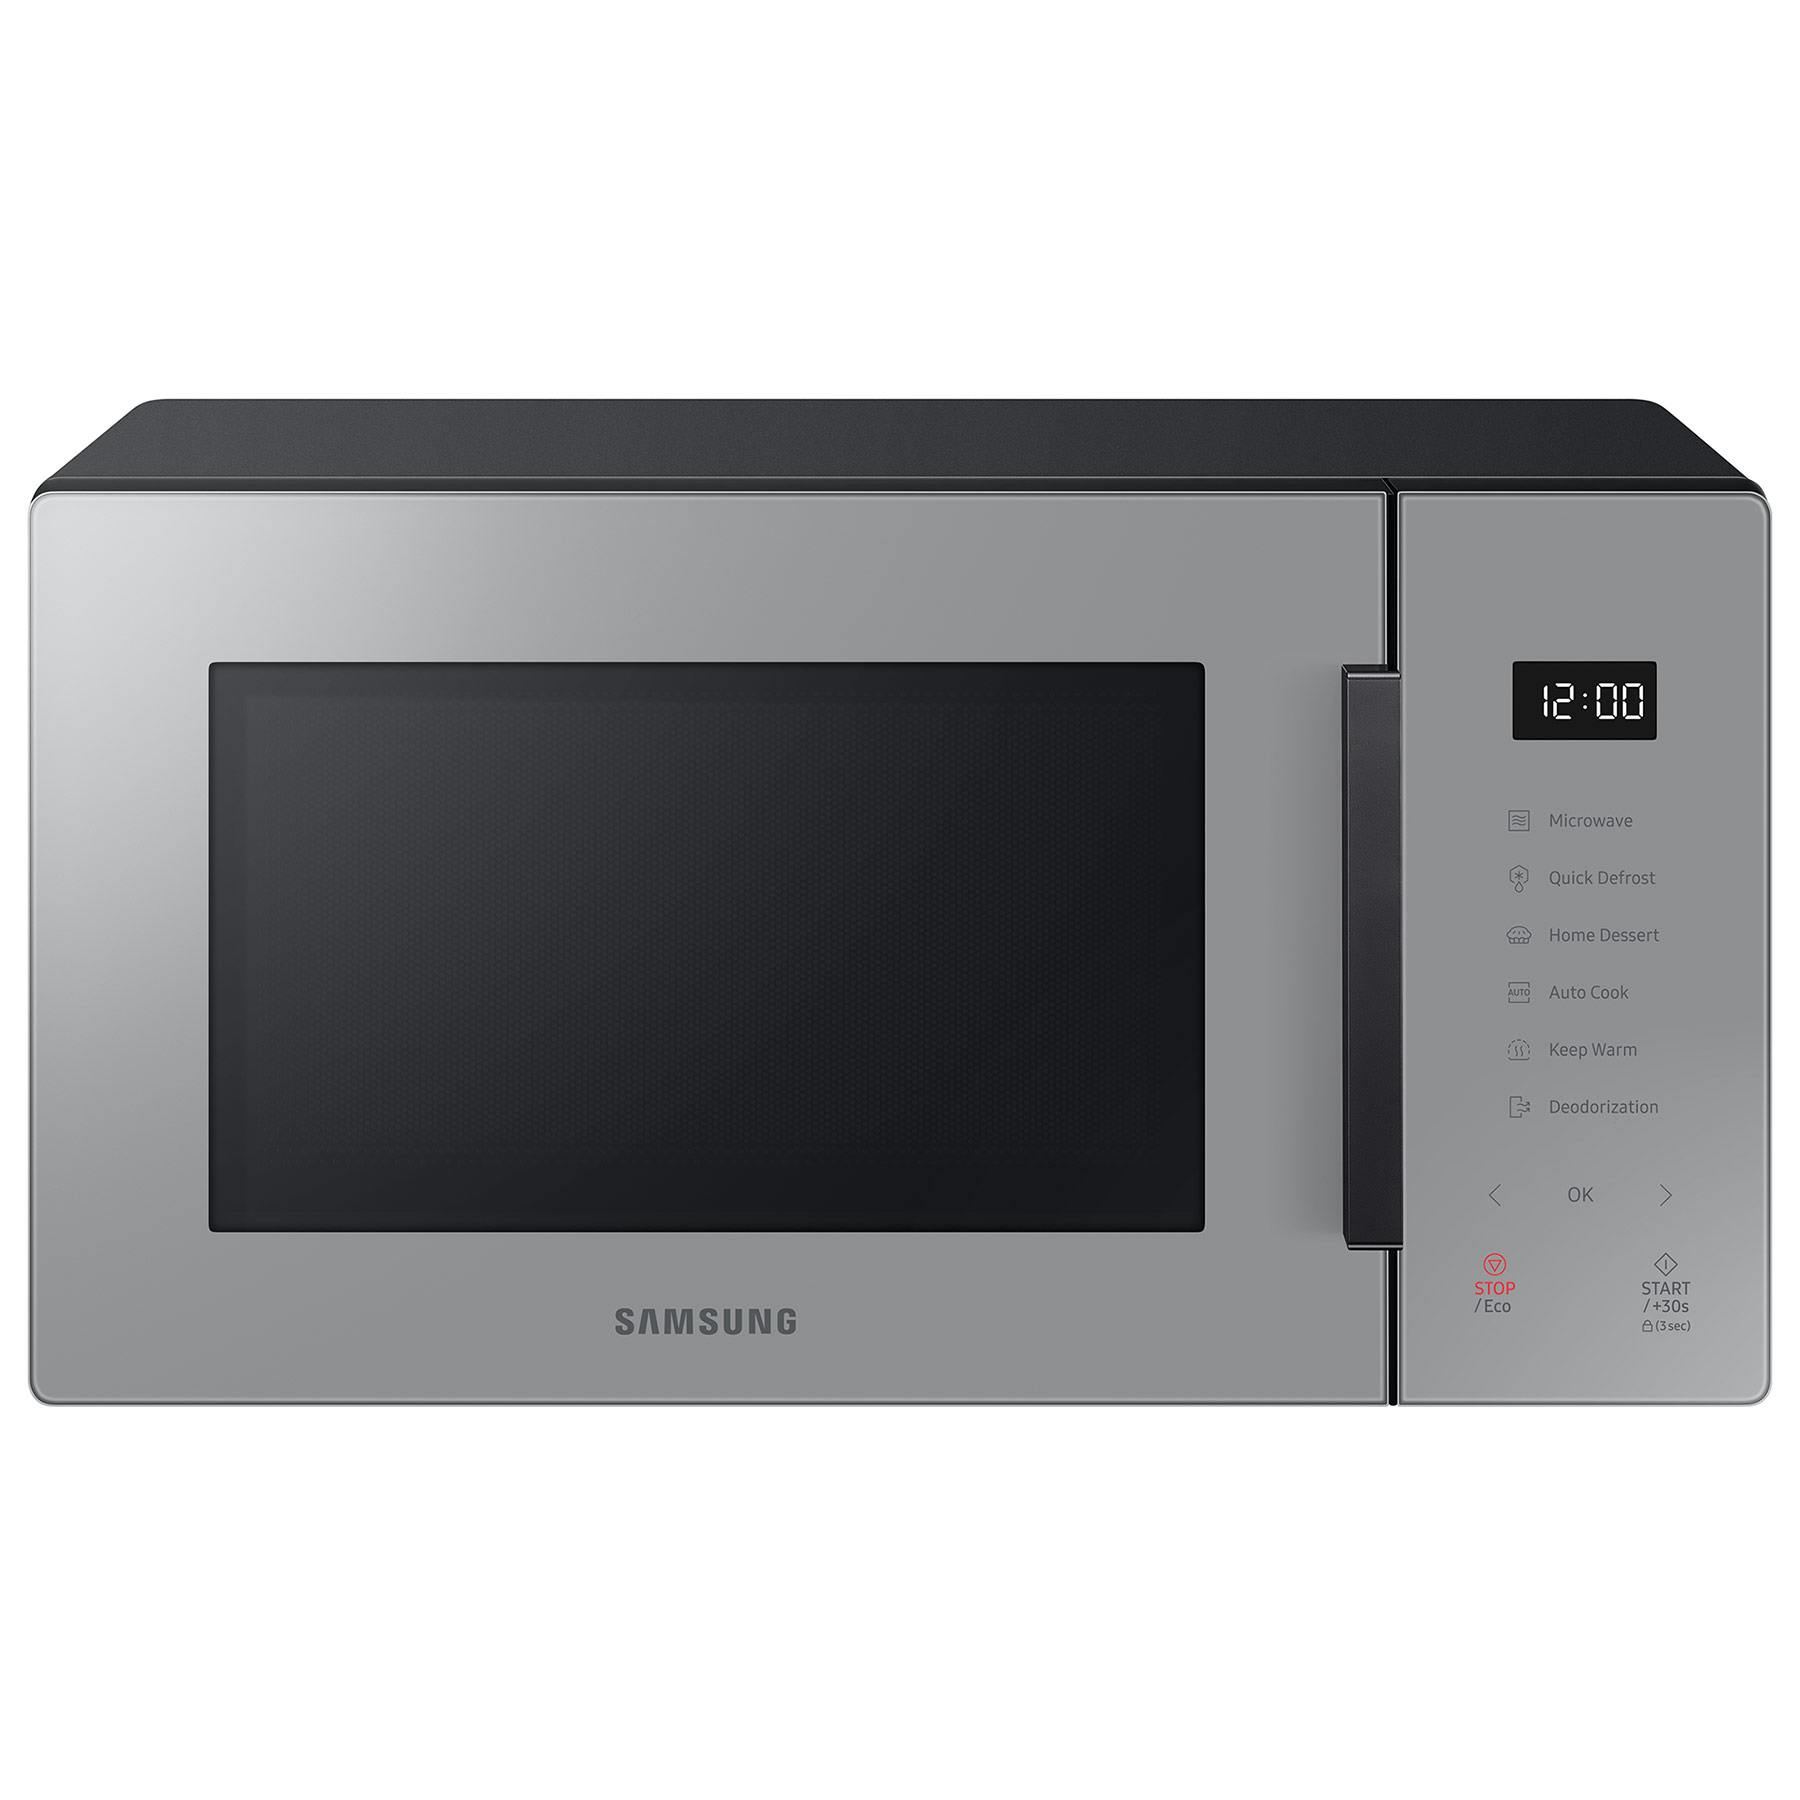 Hoover H-MICROWAVE 100 Built-in Microwave with Grill